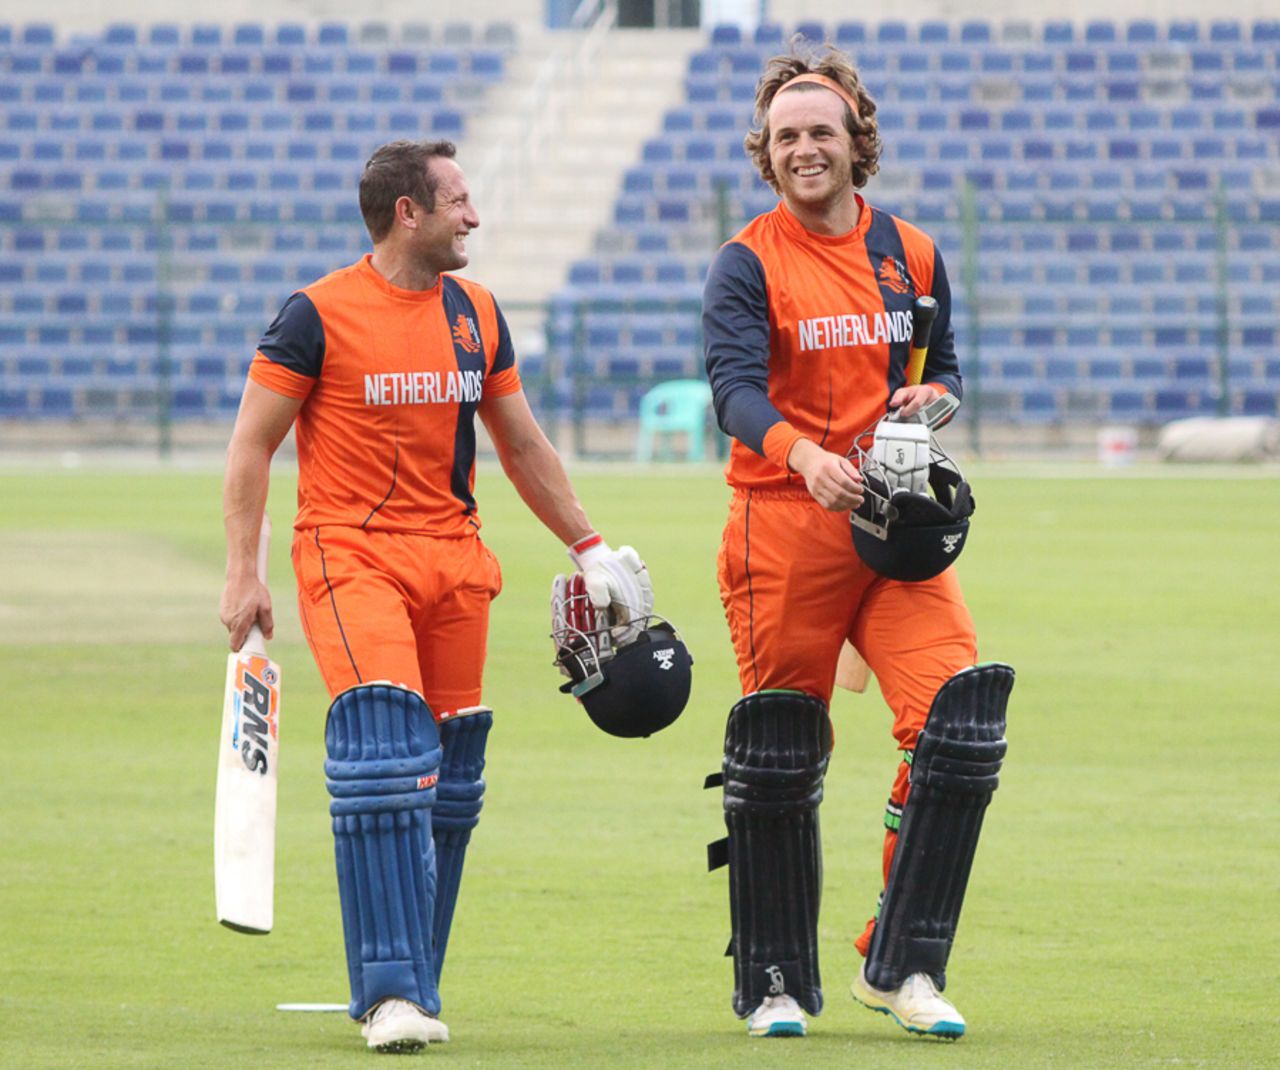 Roelof van der Merwe and Max O'Dowd are all smiles after clinching victory, Netherlands v Oman, Desert T20, Group B, Abu Dhabi, January 15, 2017